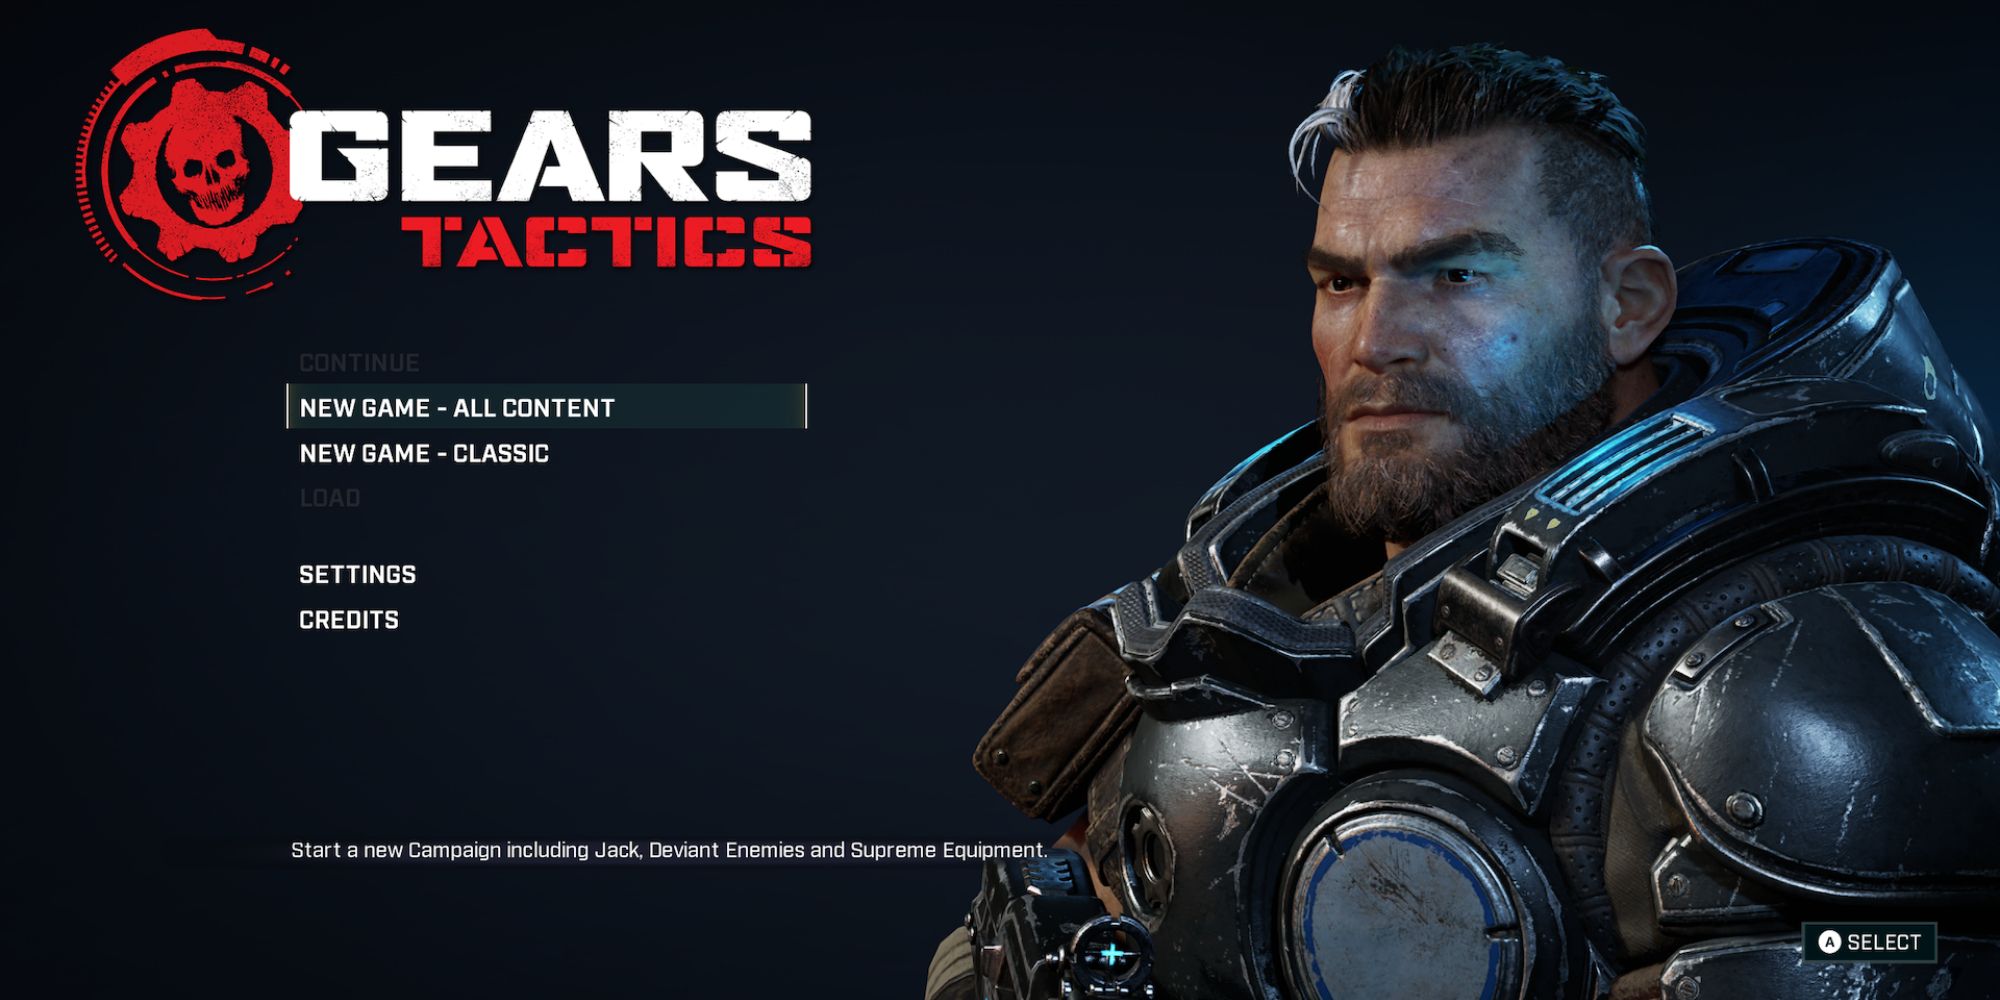 Gears Tactics the main menu for the game with Gabriel Diaz on the right taking up a large portion of the screen, with the various options on the left including two different kinds of "New Game"